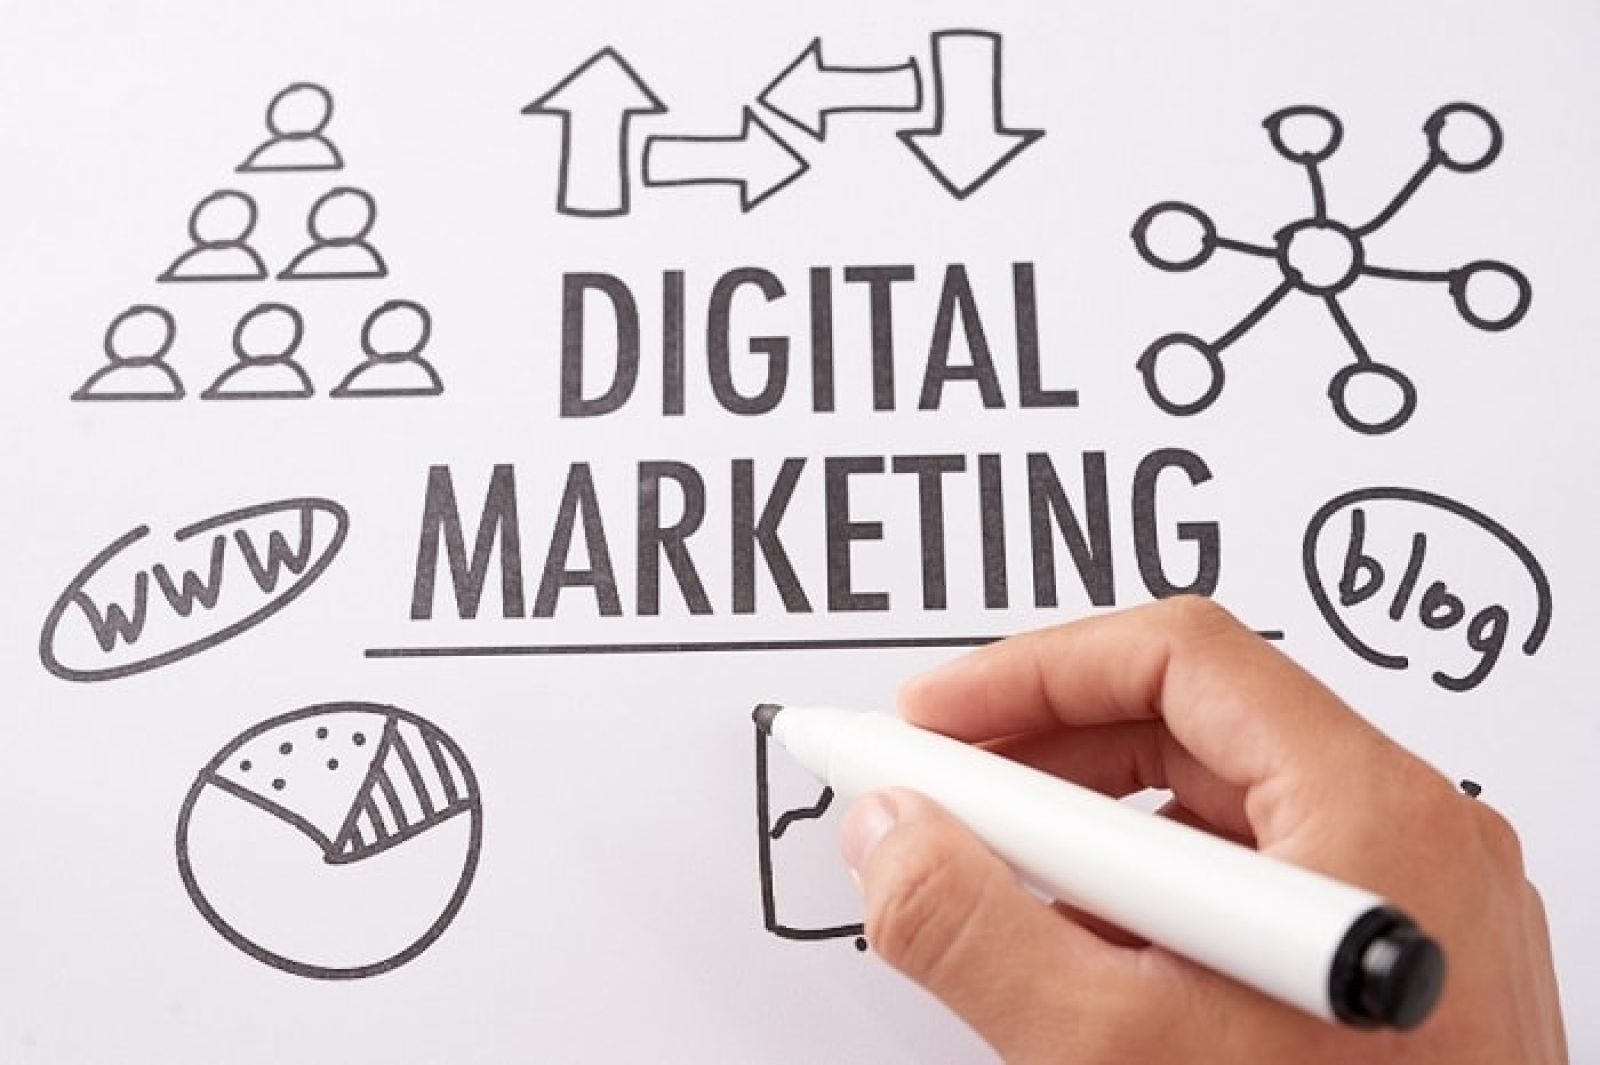 How To Efficiently Run A Digital Marketing Campaign